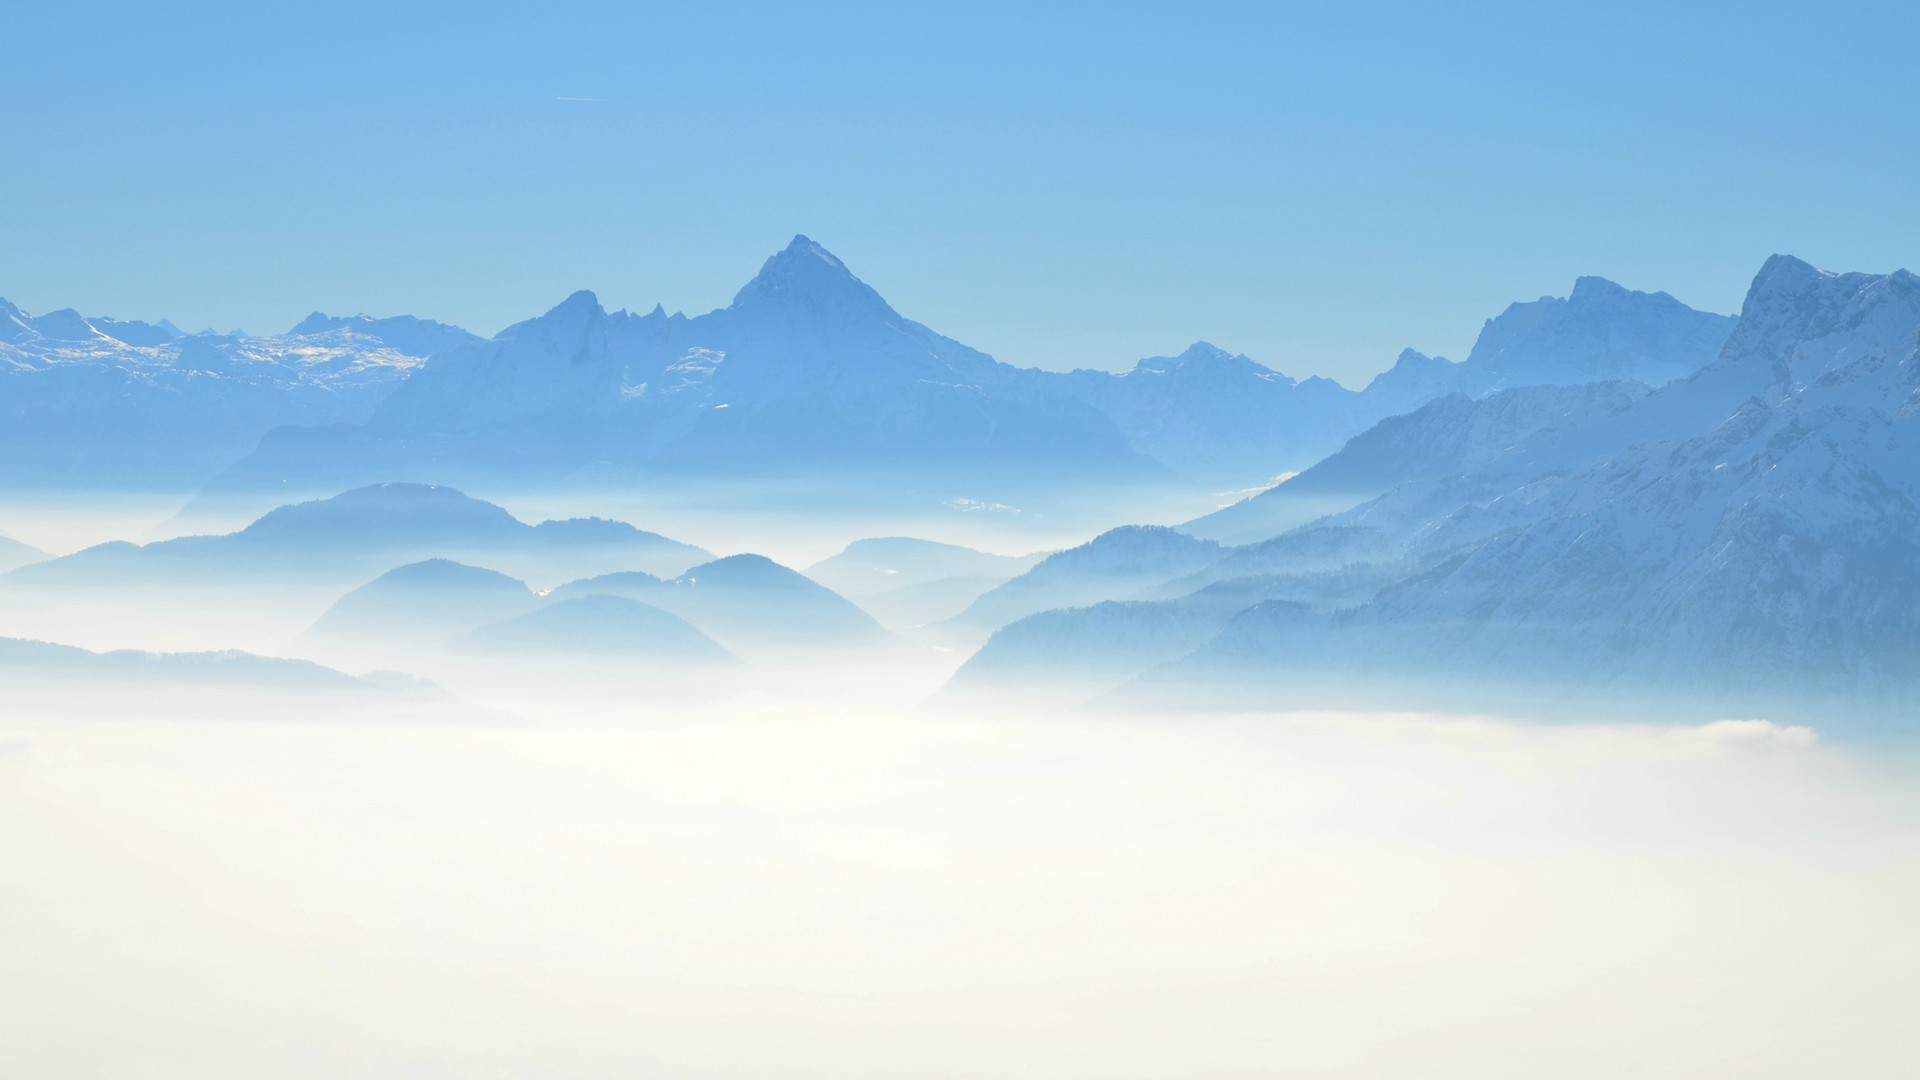 General 1920x1080 landscape mountains clouds snowy mountain overexposed nature